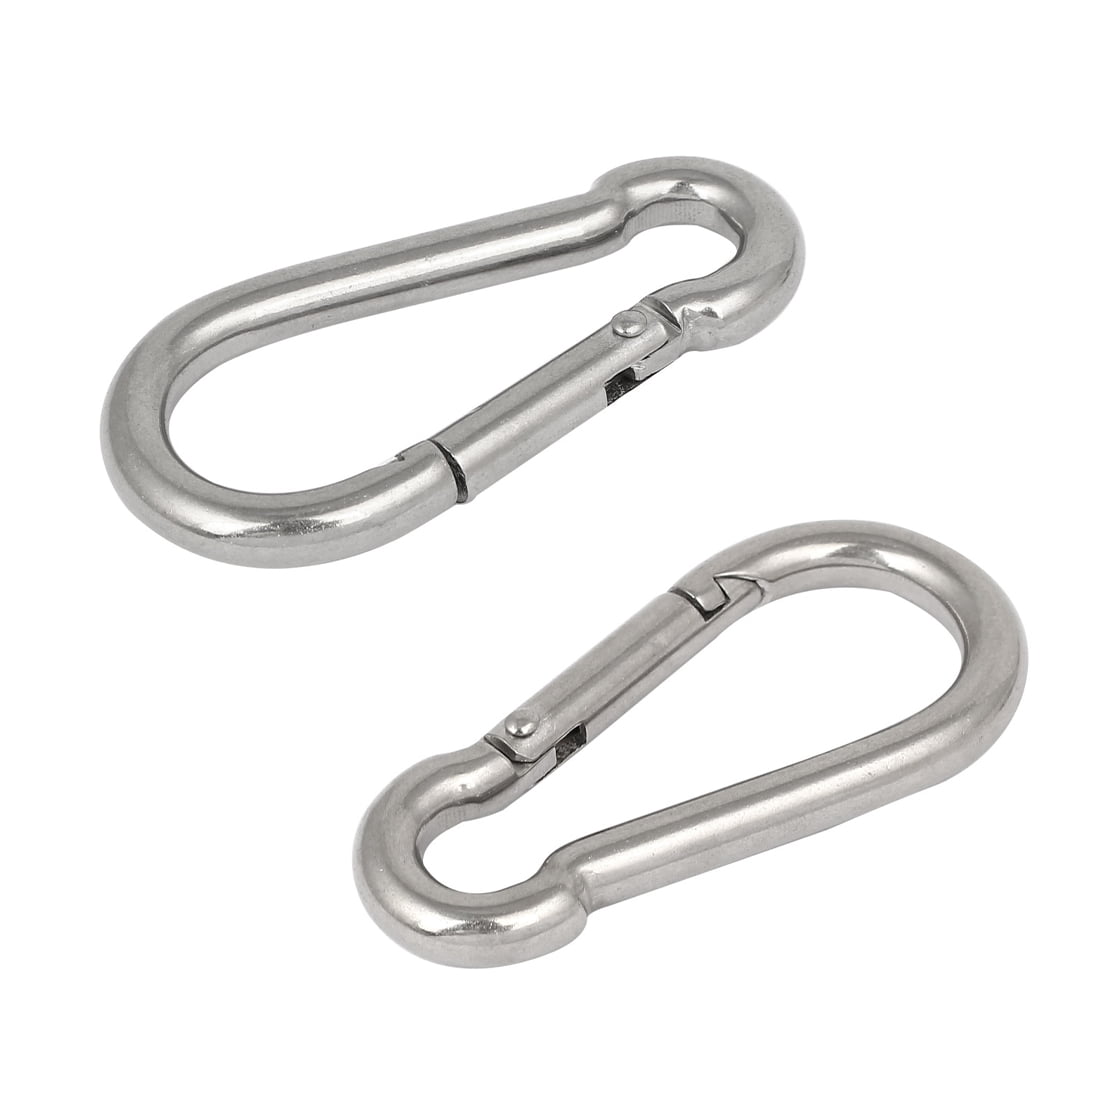 Details about   Outdoor Hiking Spring Snap Lock Ring Carabiner M8 Set of 2 